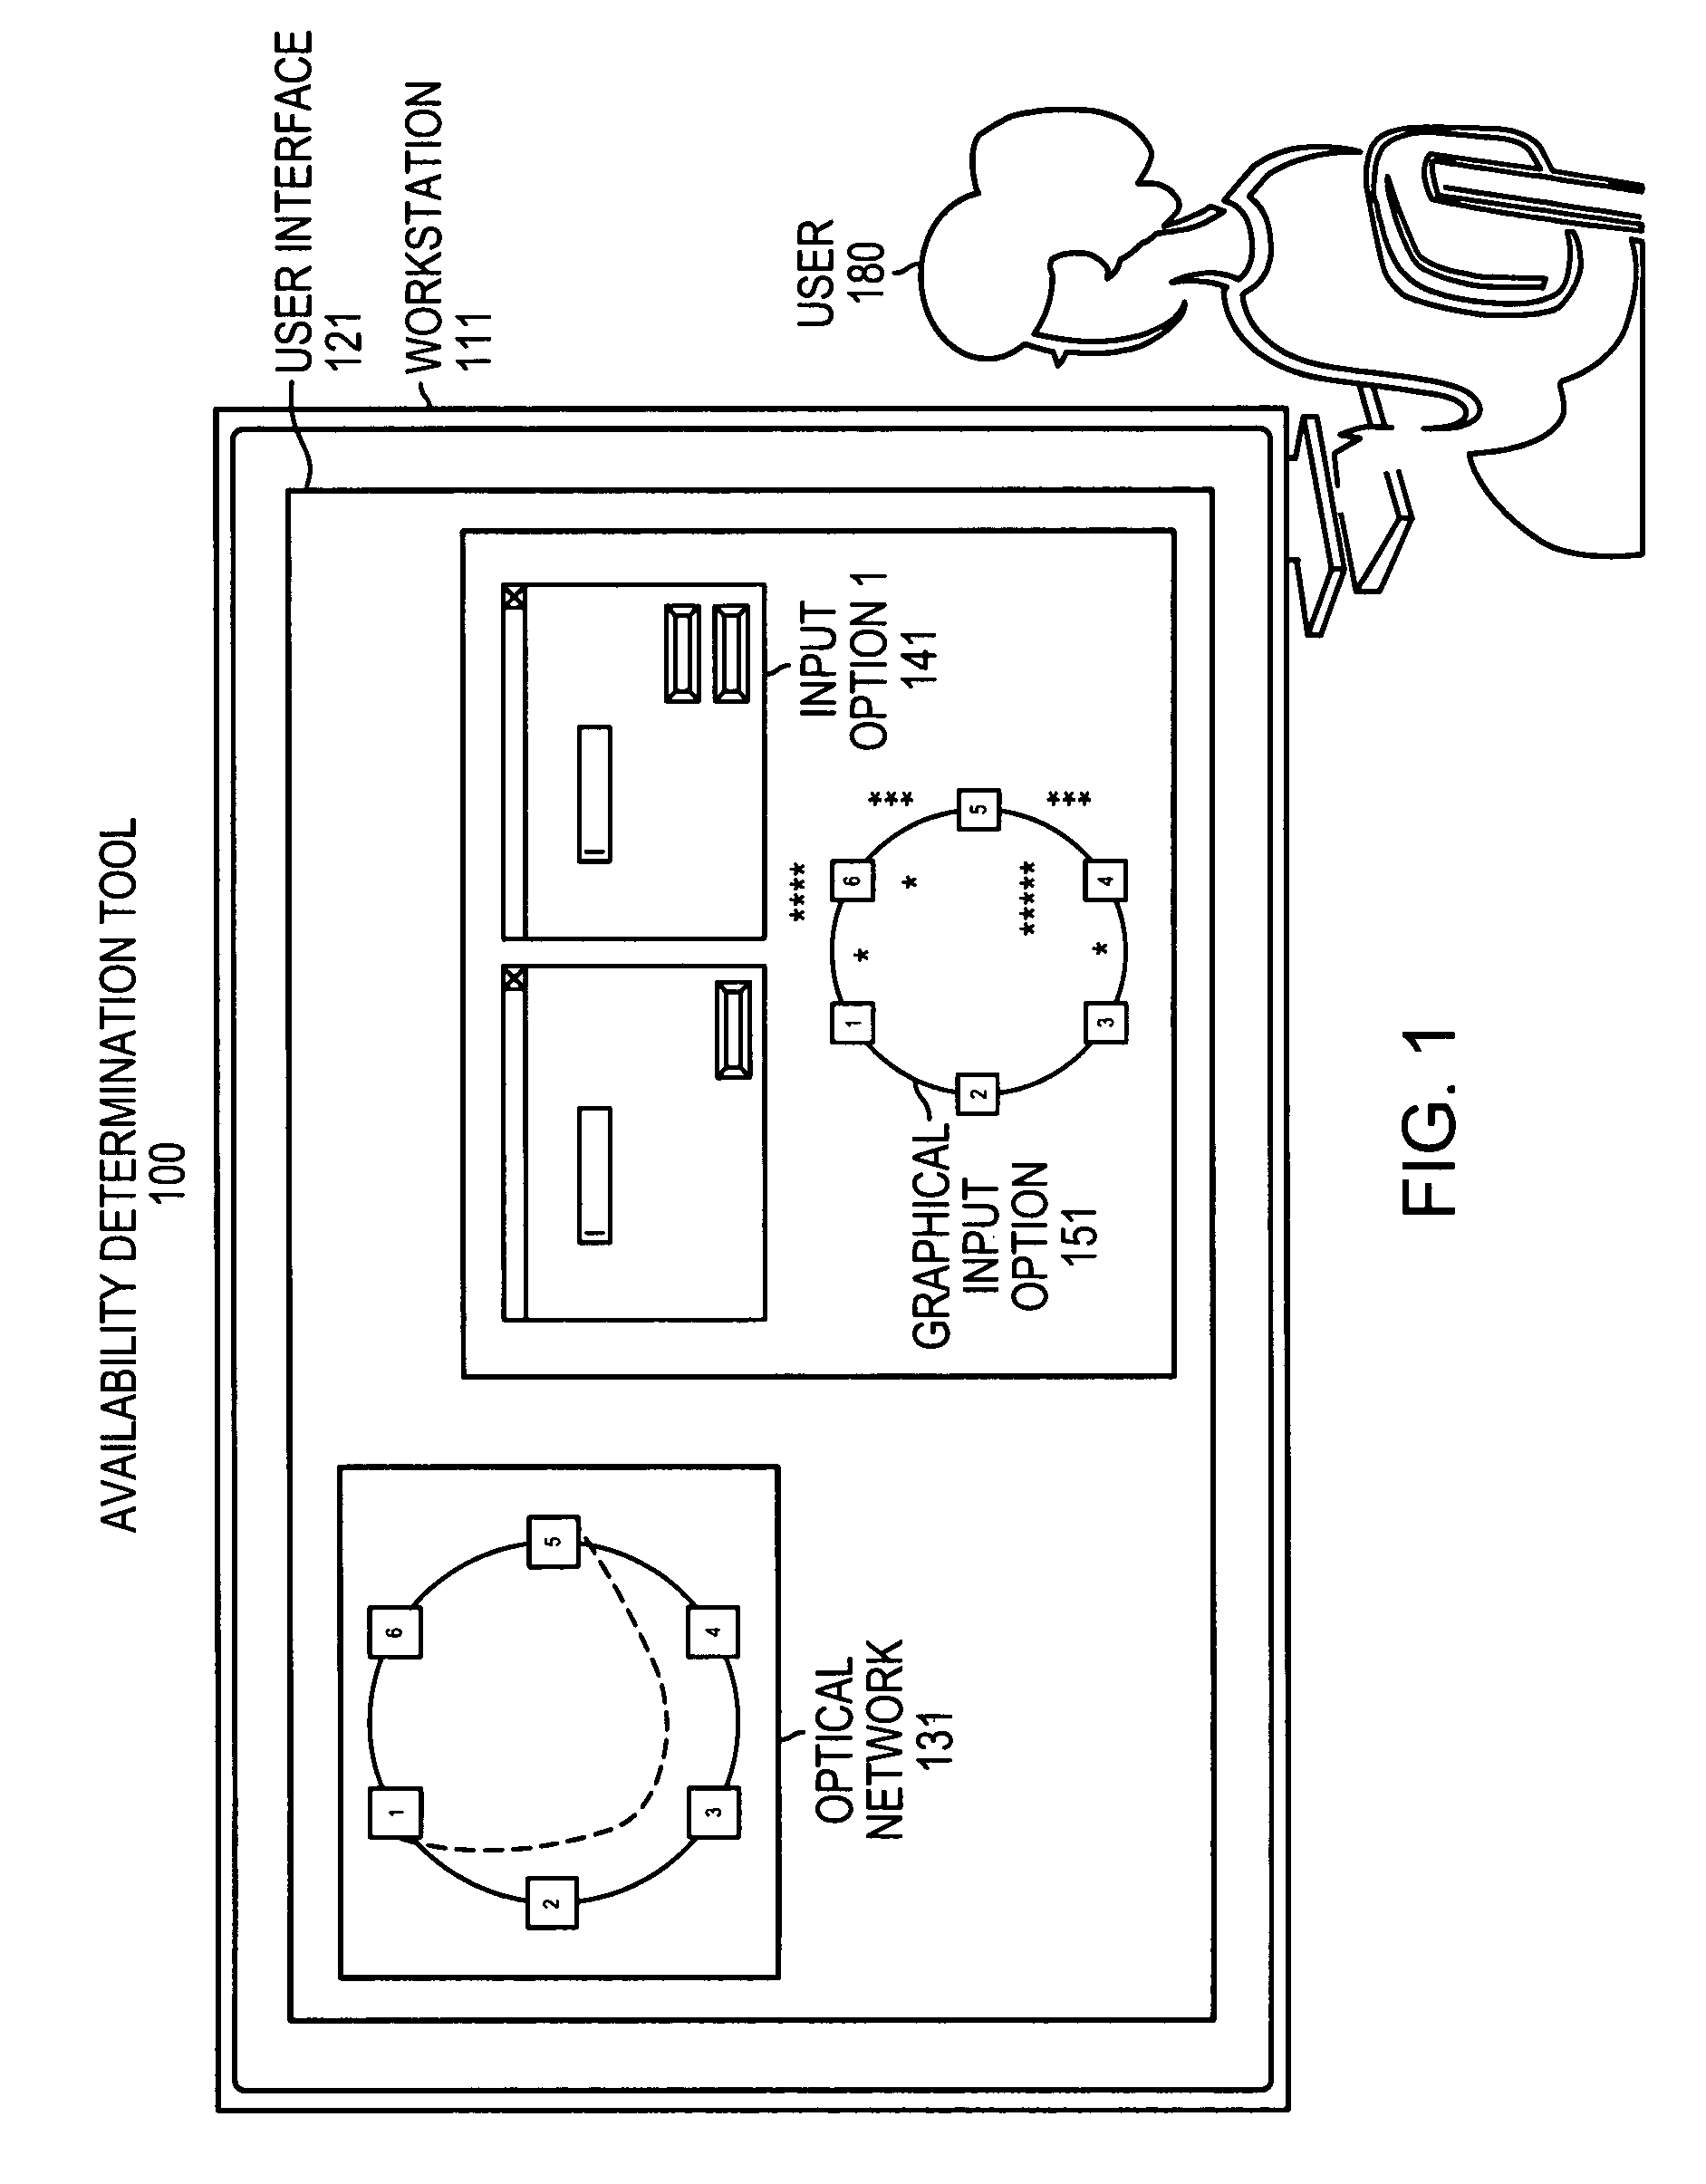 Method and apparatus for displaying and identifying available wavelength paths across a network